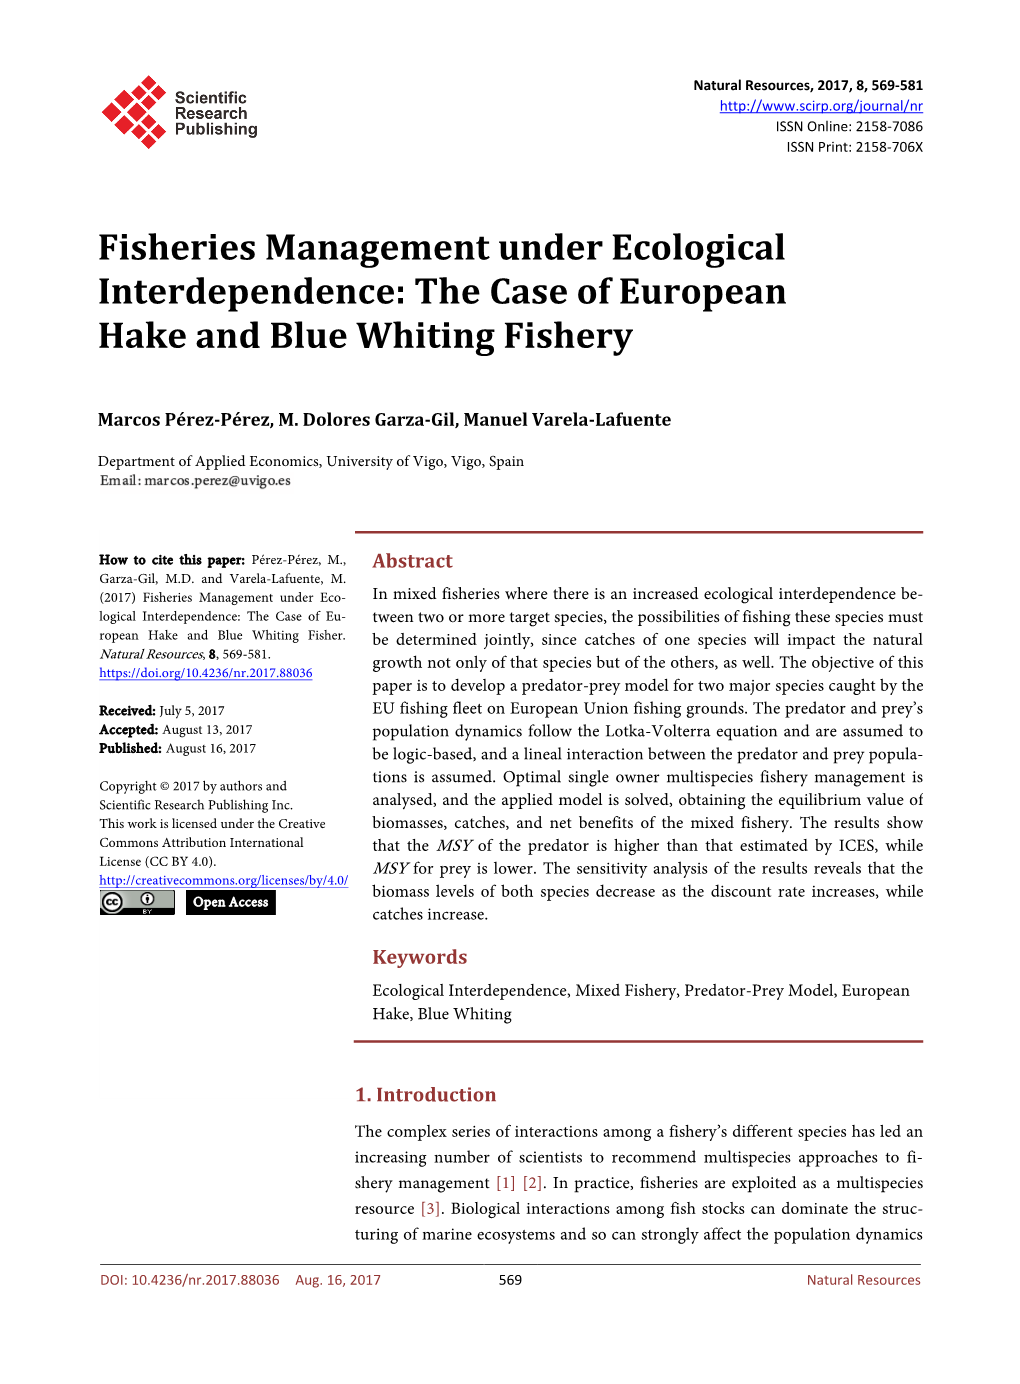 The Case of European Hake and Blue Whiting Fishery